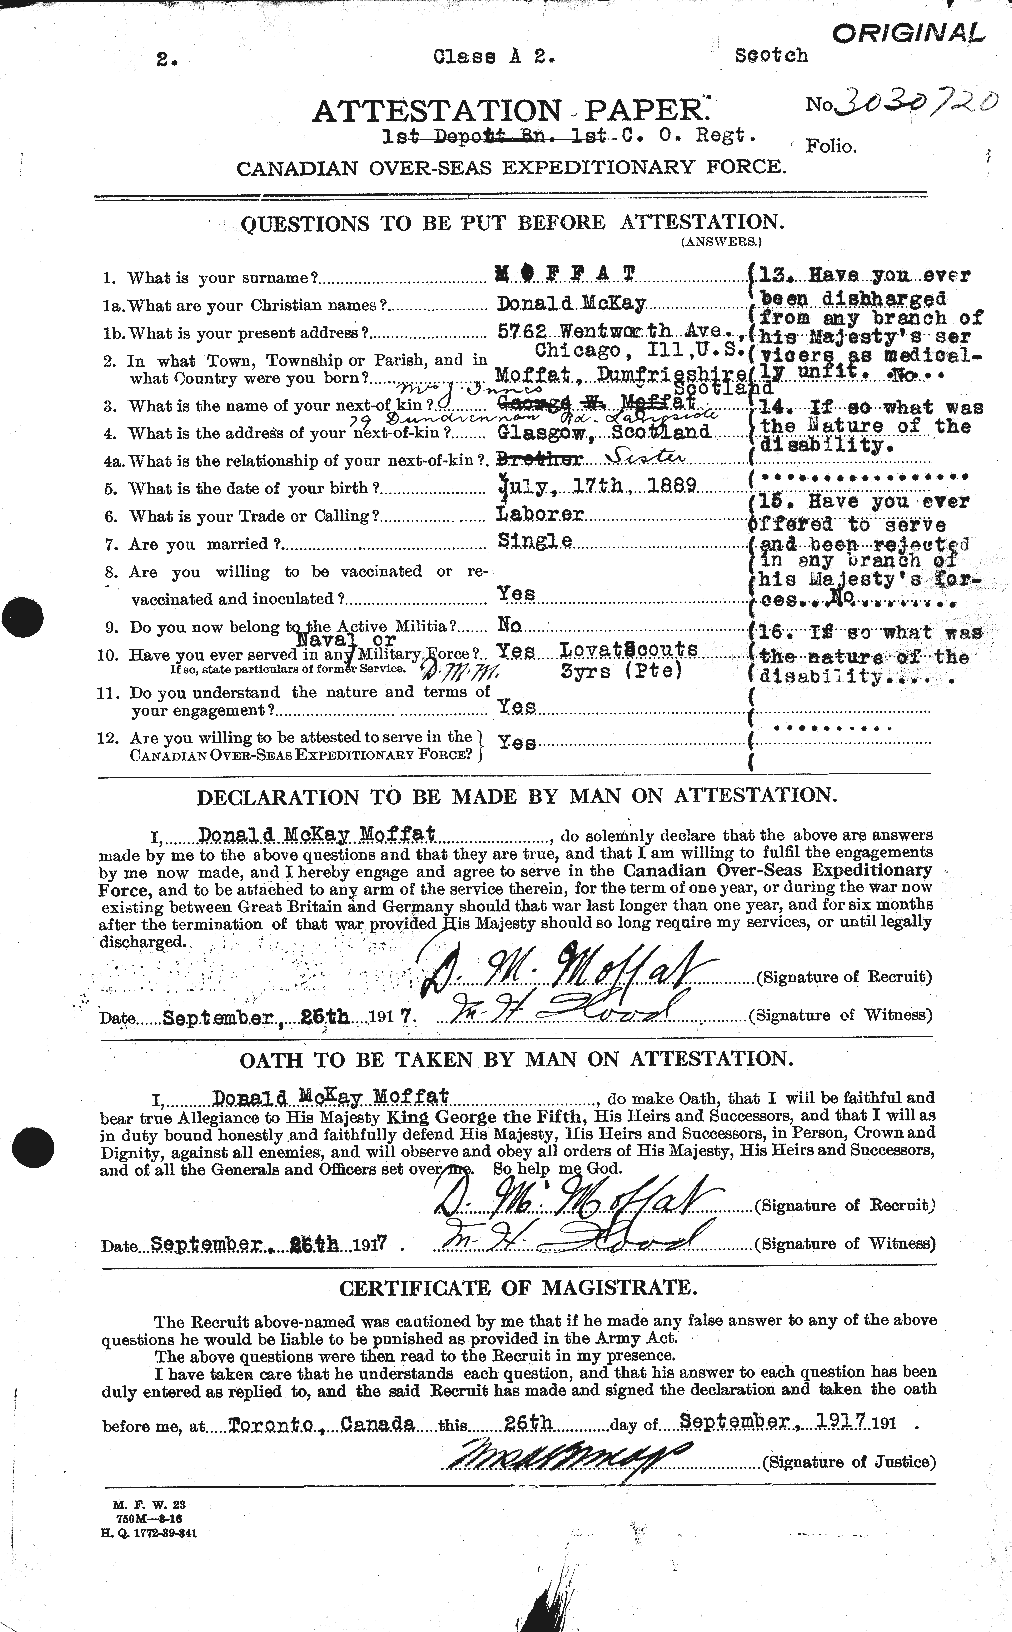 Personnel Records of the First World War - CEF 499005a